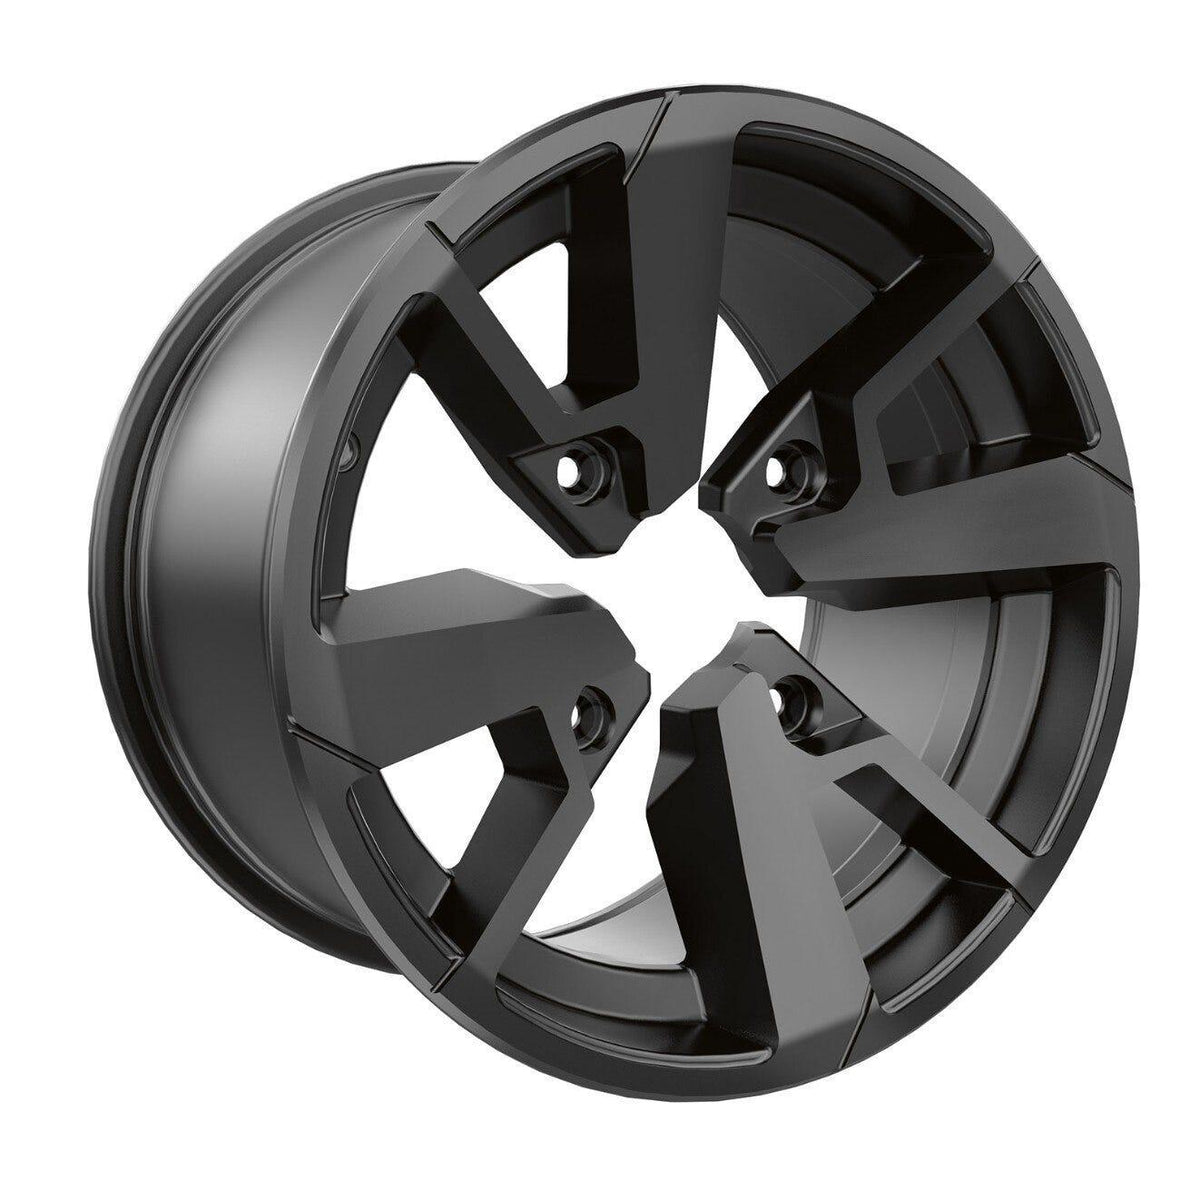 14&quot; Rim - Rear / Black with clear coat - Factory Recreation